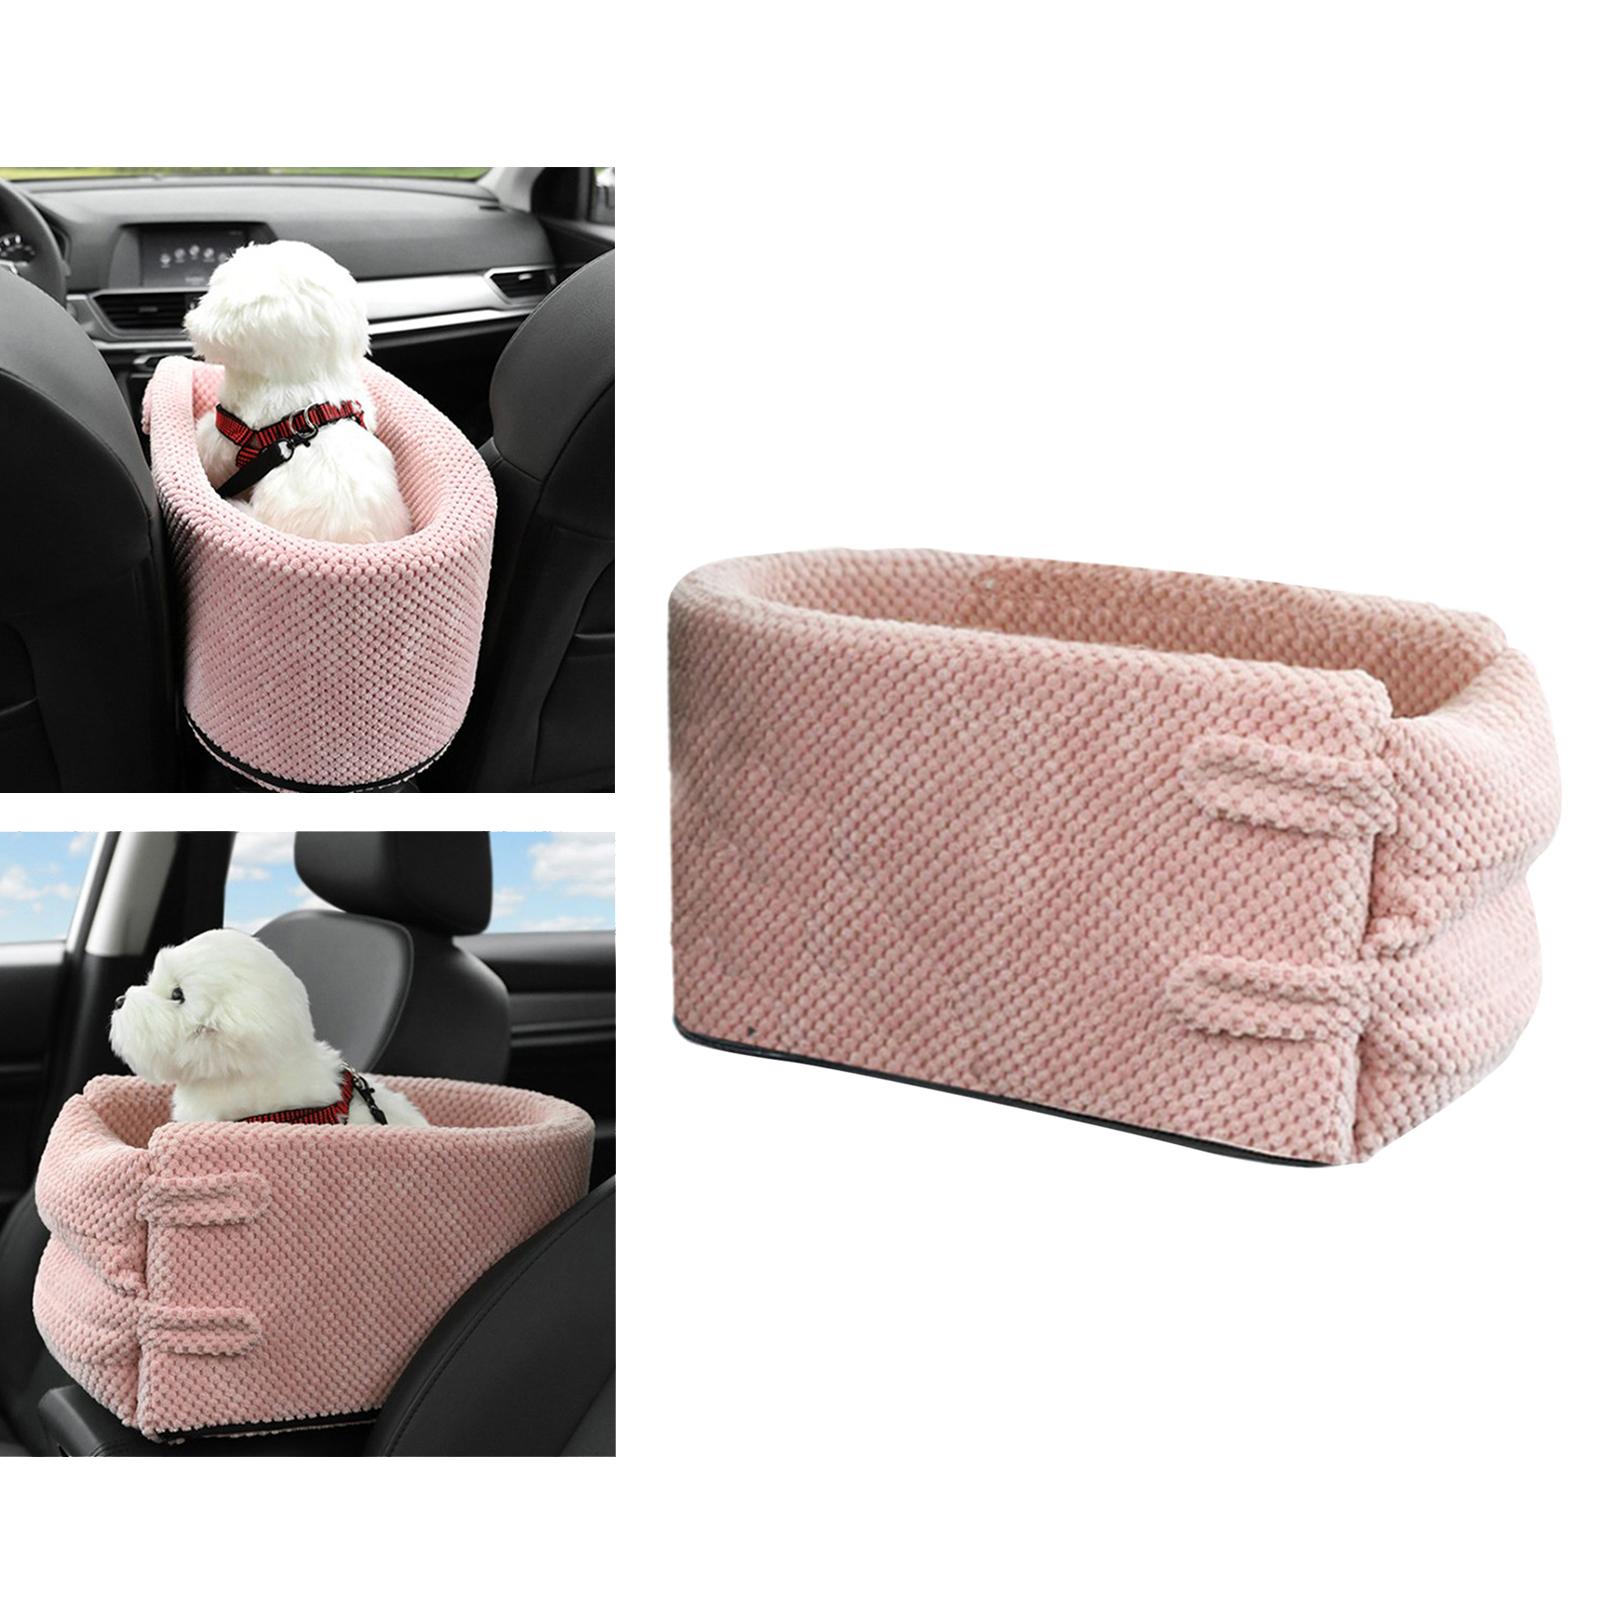 Dog Car Carrier Puppy Pet Booster Seat Mat Crate for SUV Van Truck Cage Nest